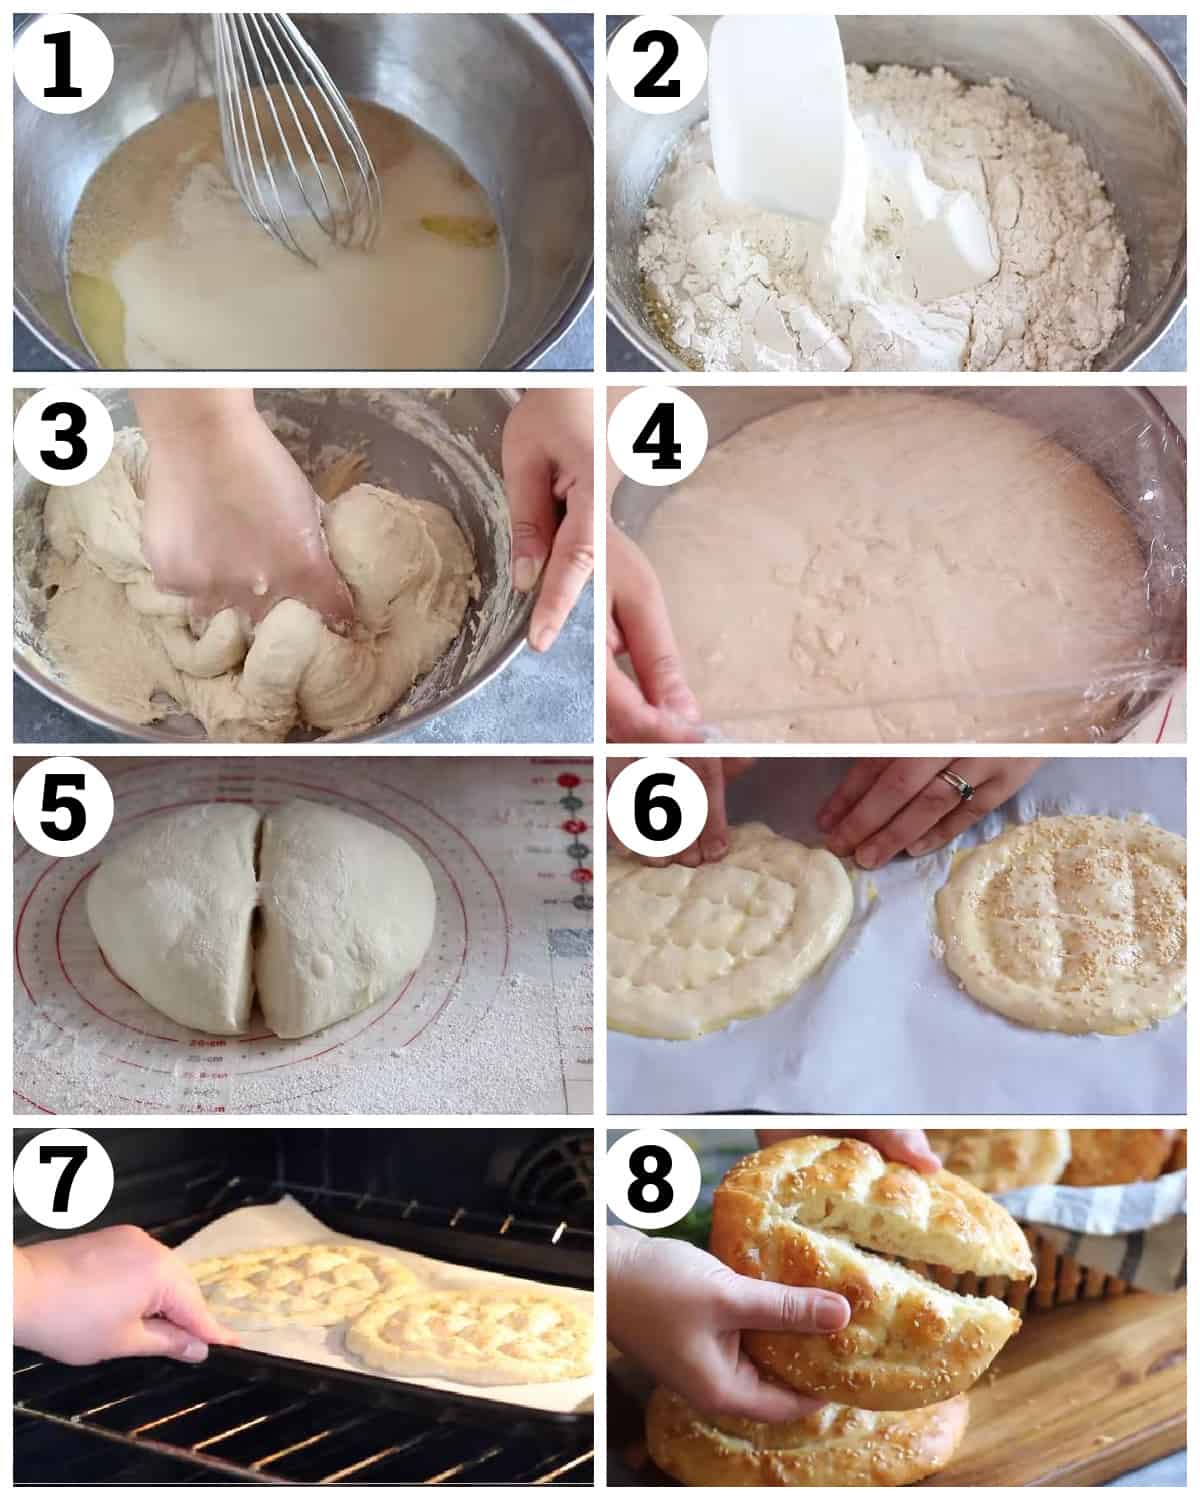 mix the wet and dry ingredients, let the dough rise, shape and bake. 